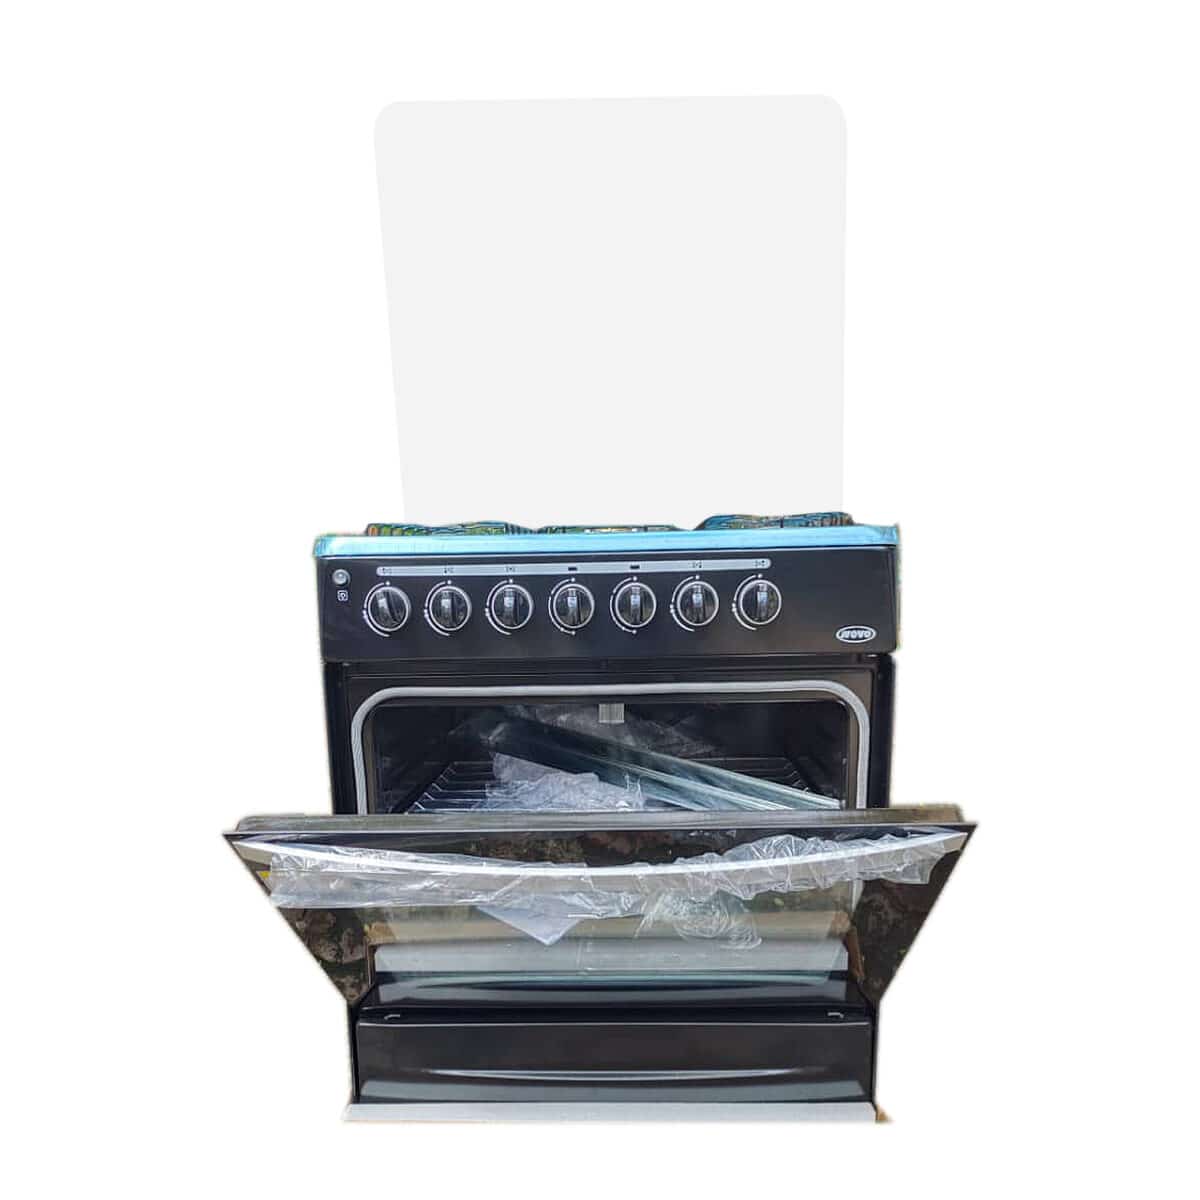 NOVO 5 Gas Burner with Oven and Grill 80x55cm